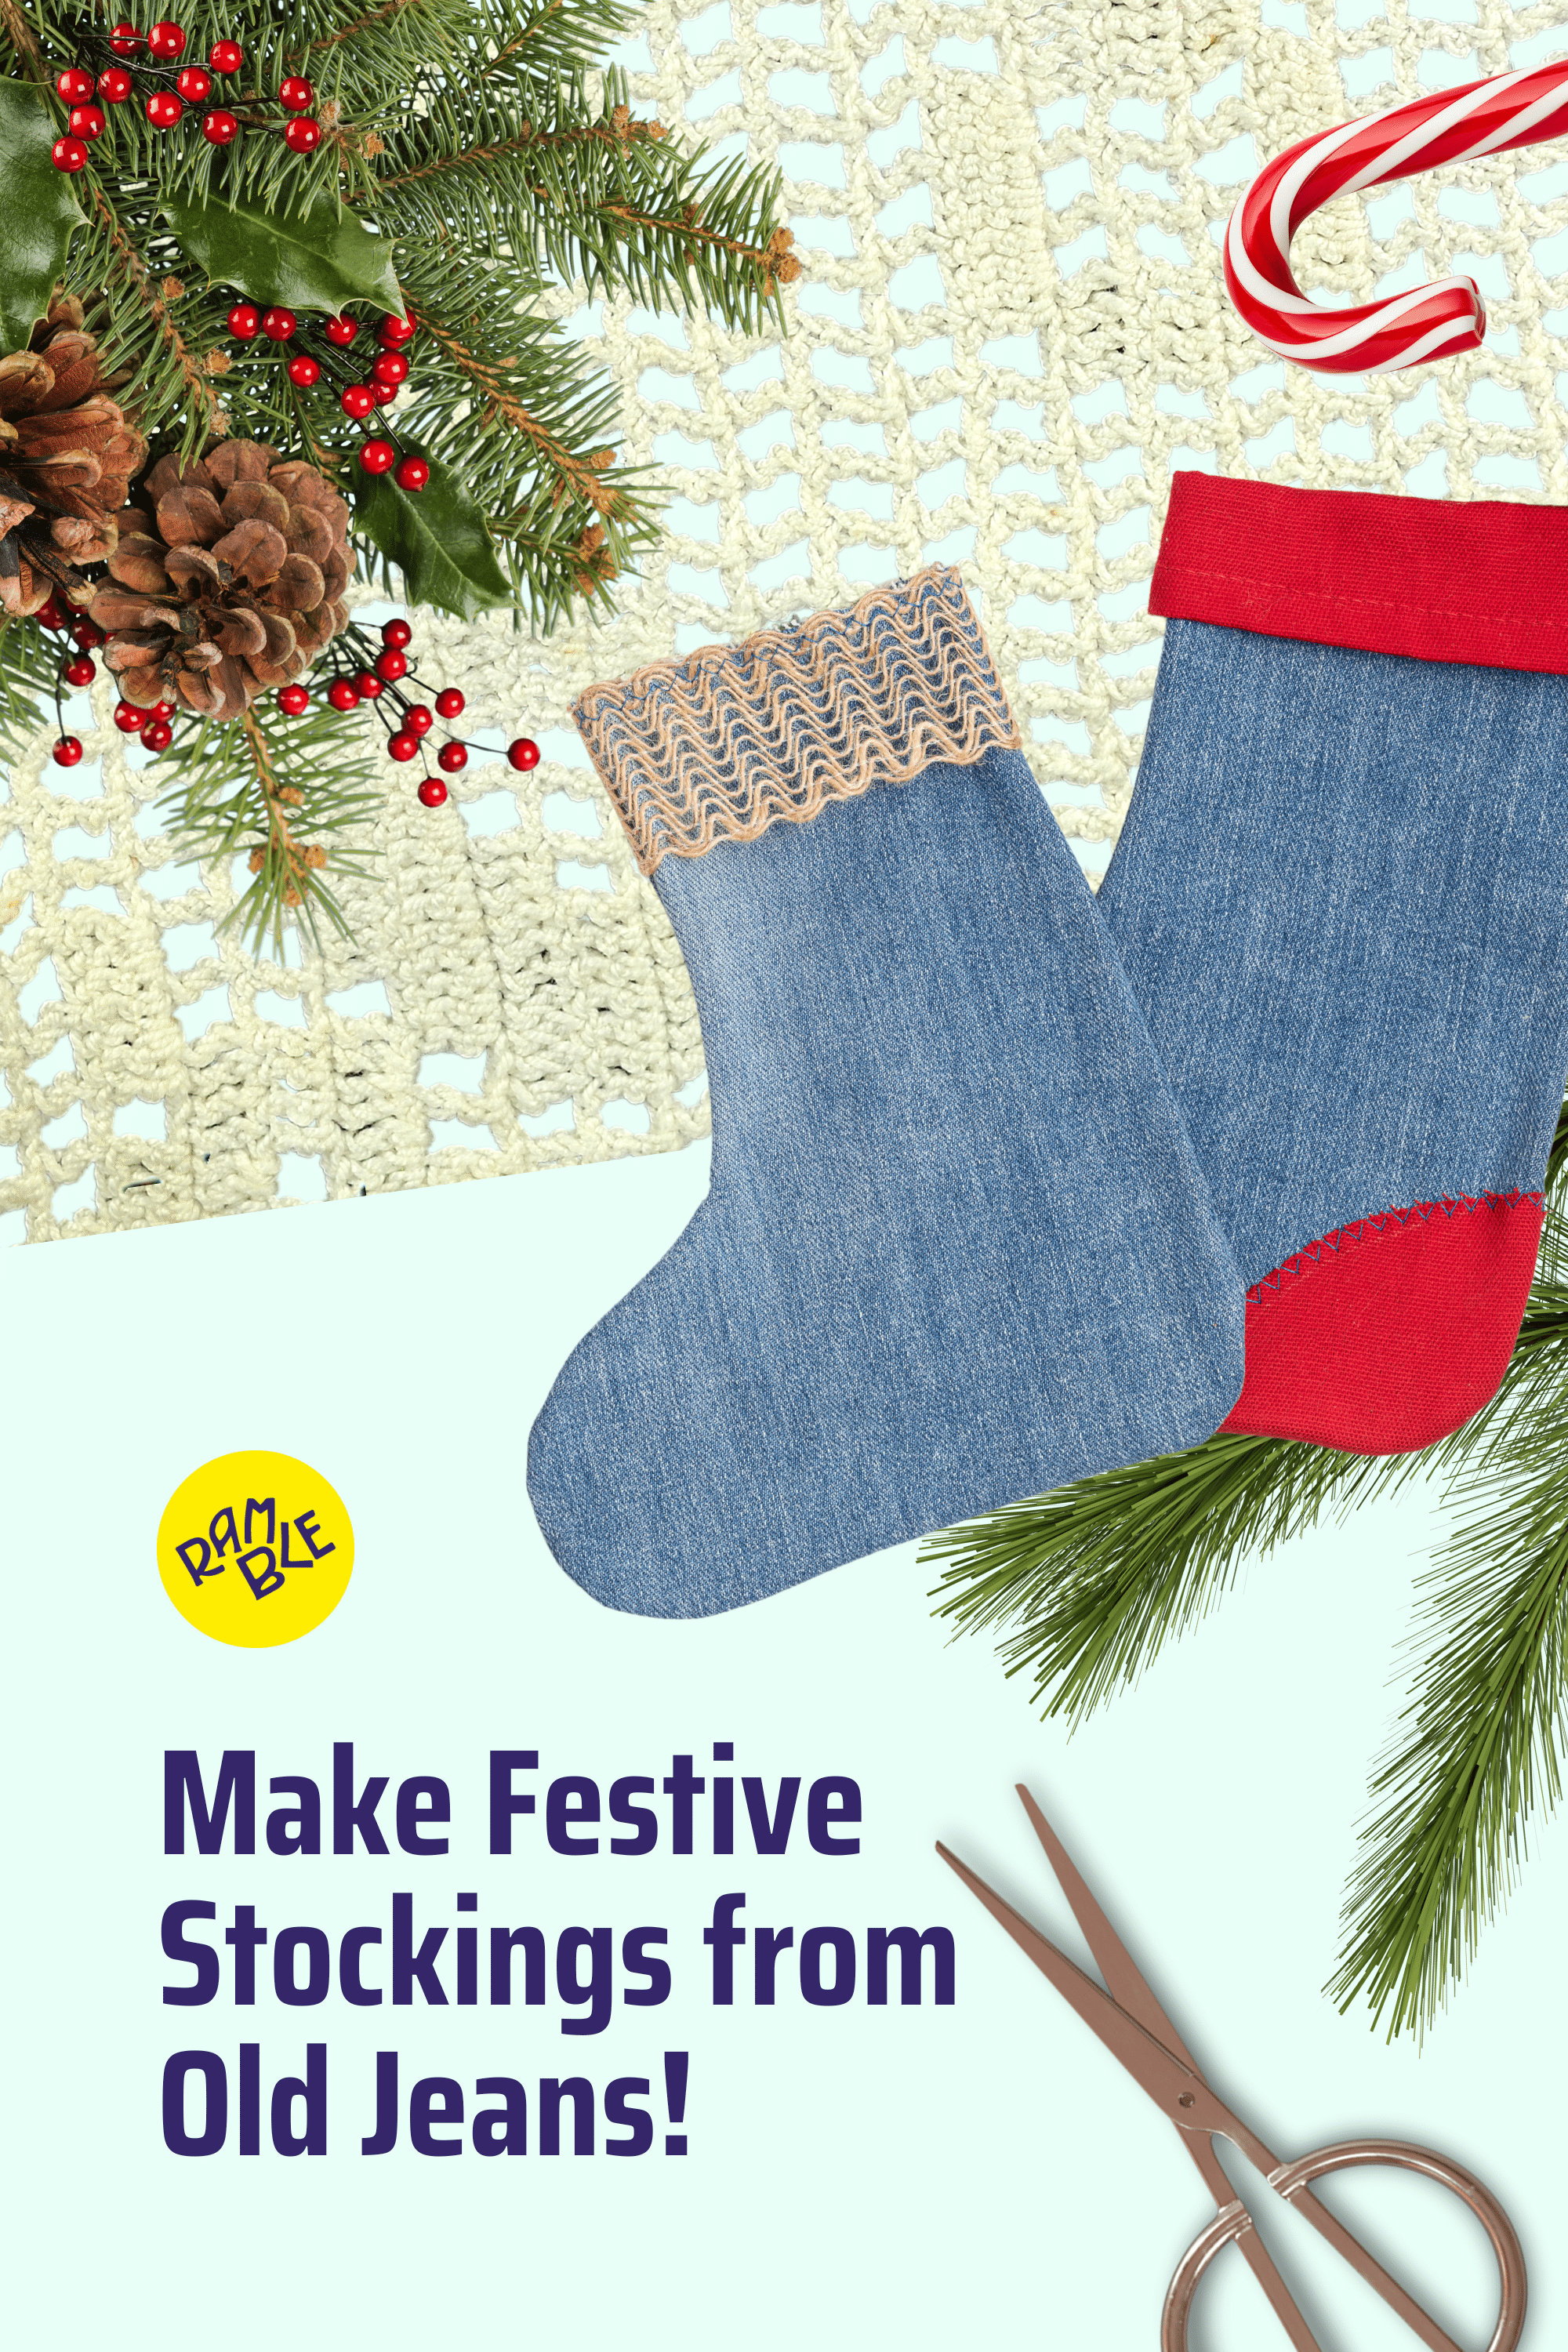 Pinterest—Ramble Gifts: Make Festive Stockings from Old Jeans